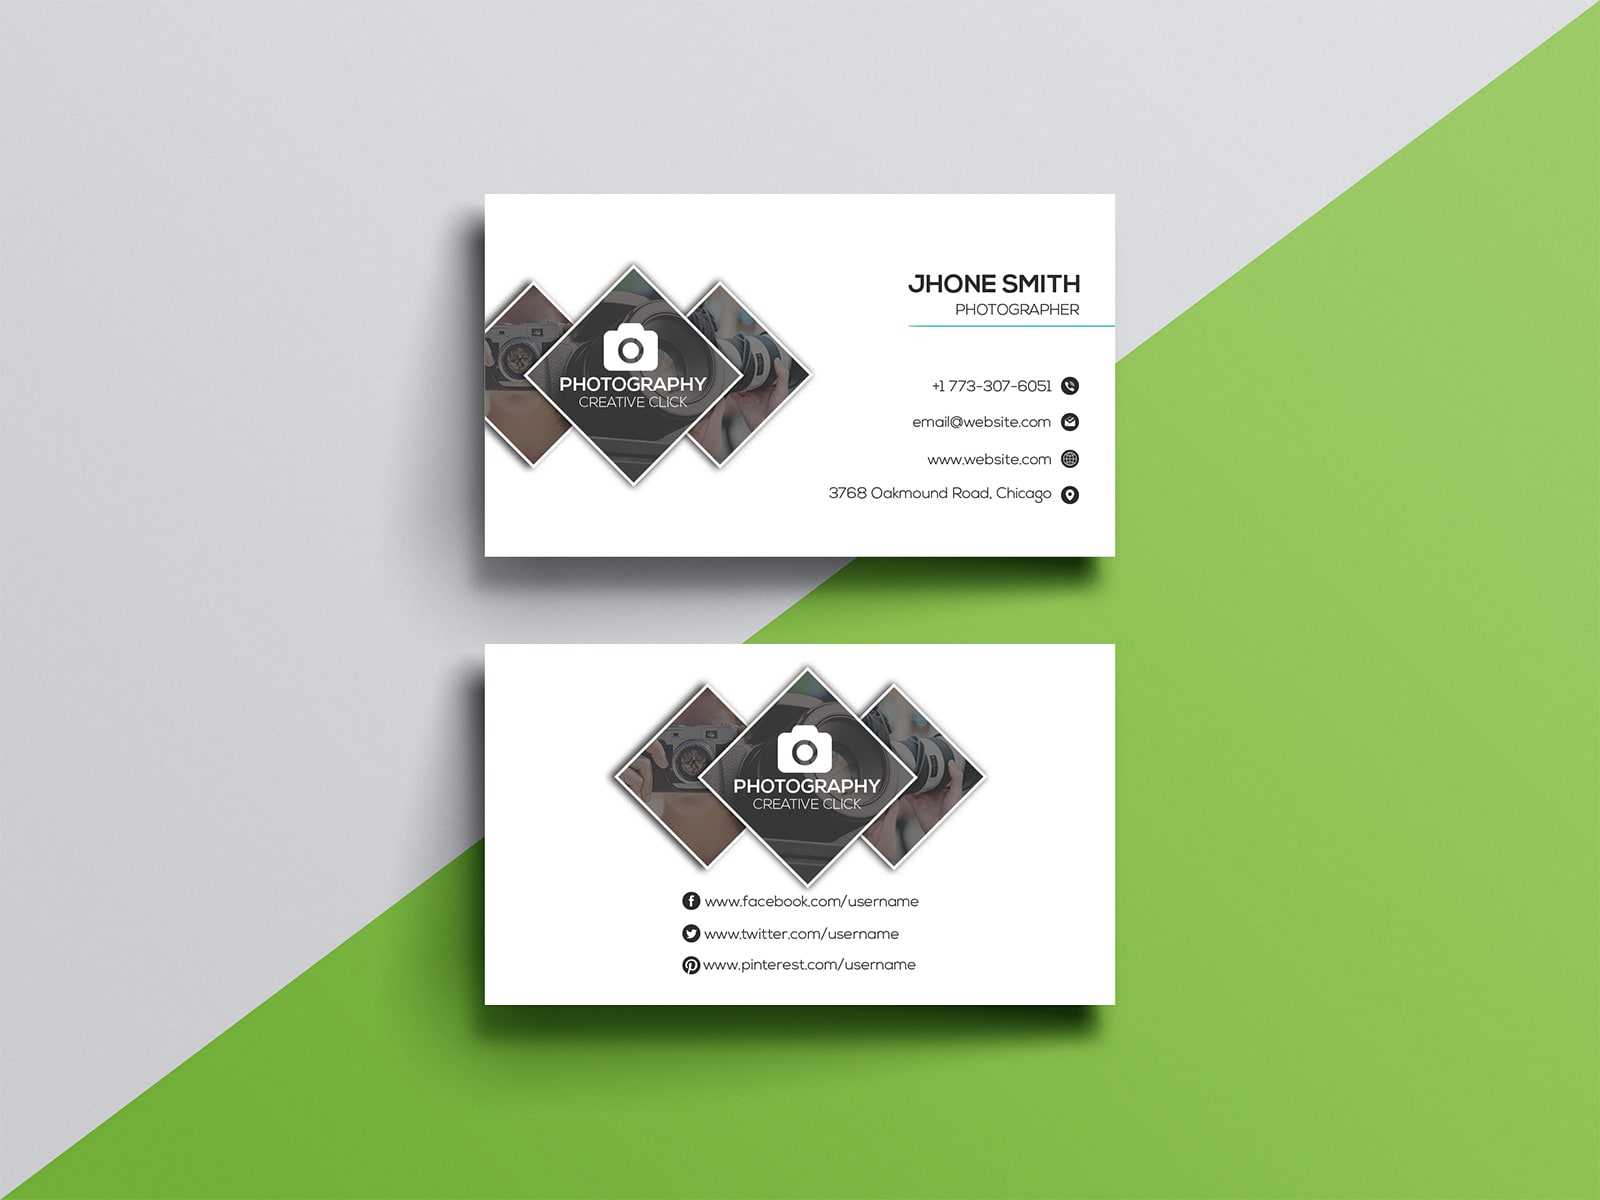 Photographer Business Card Template For Web Design Business Cards Templates